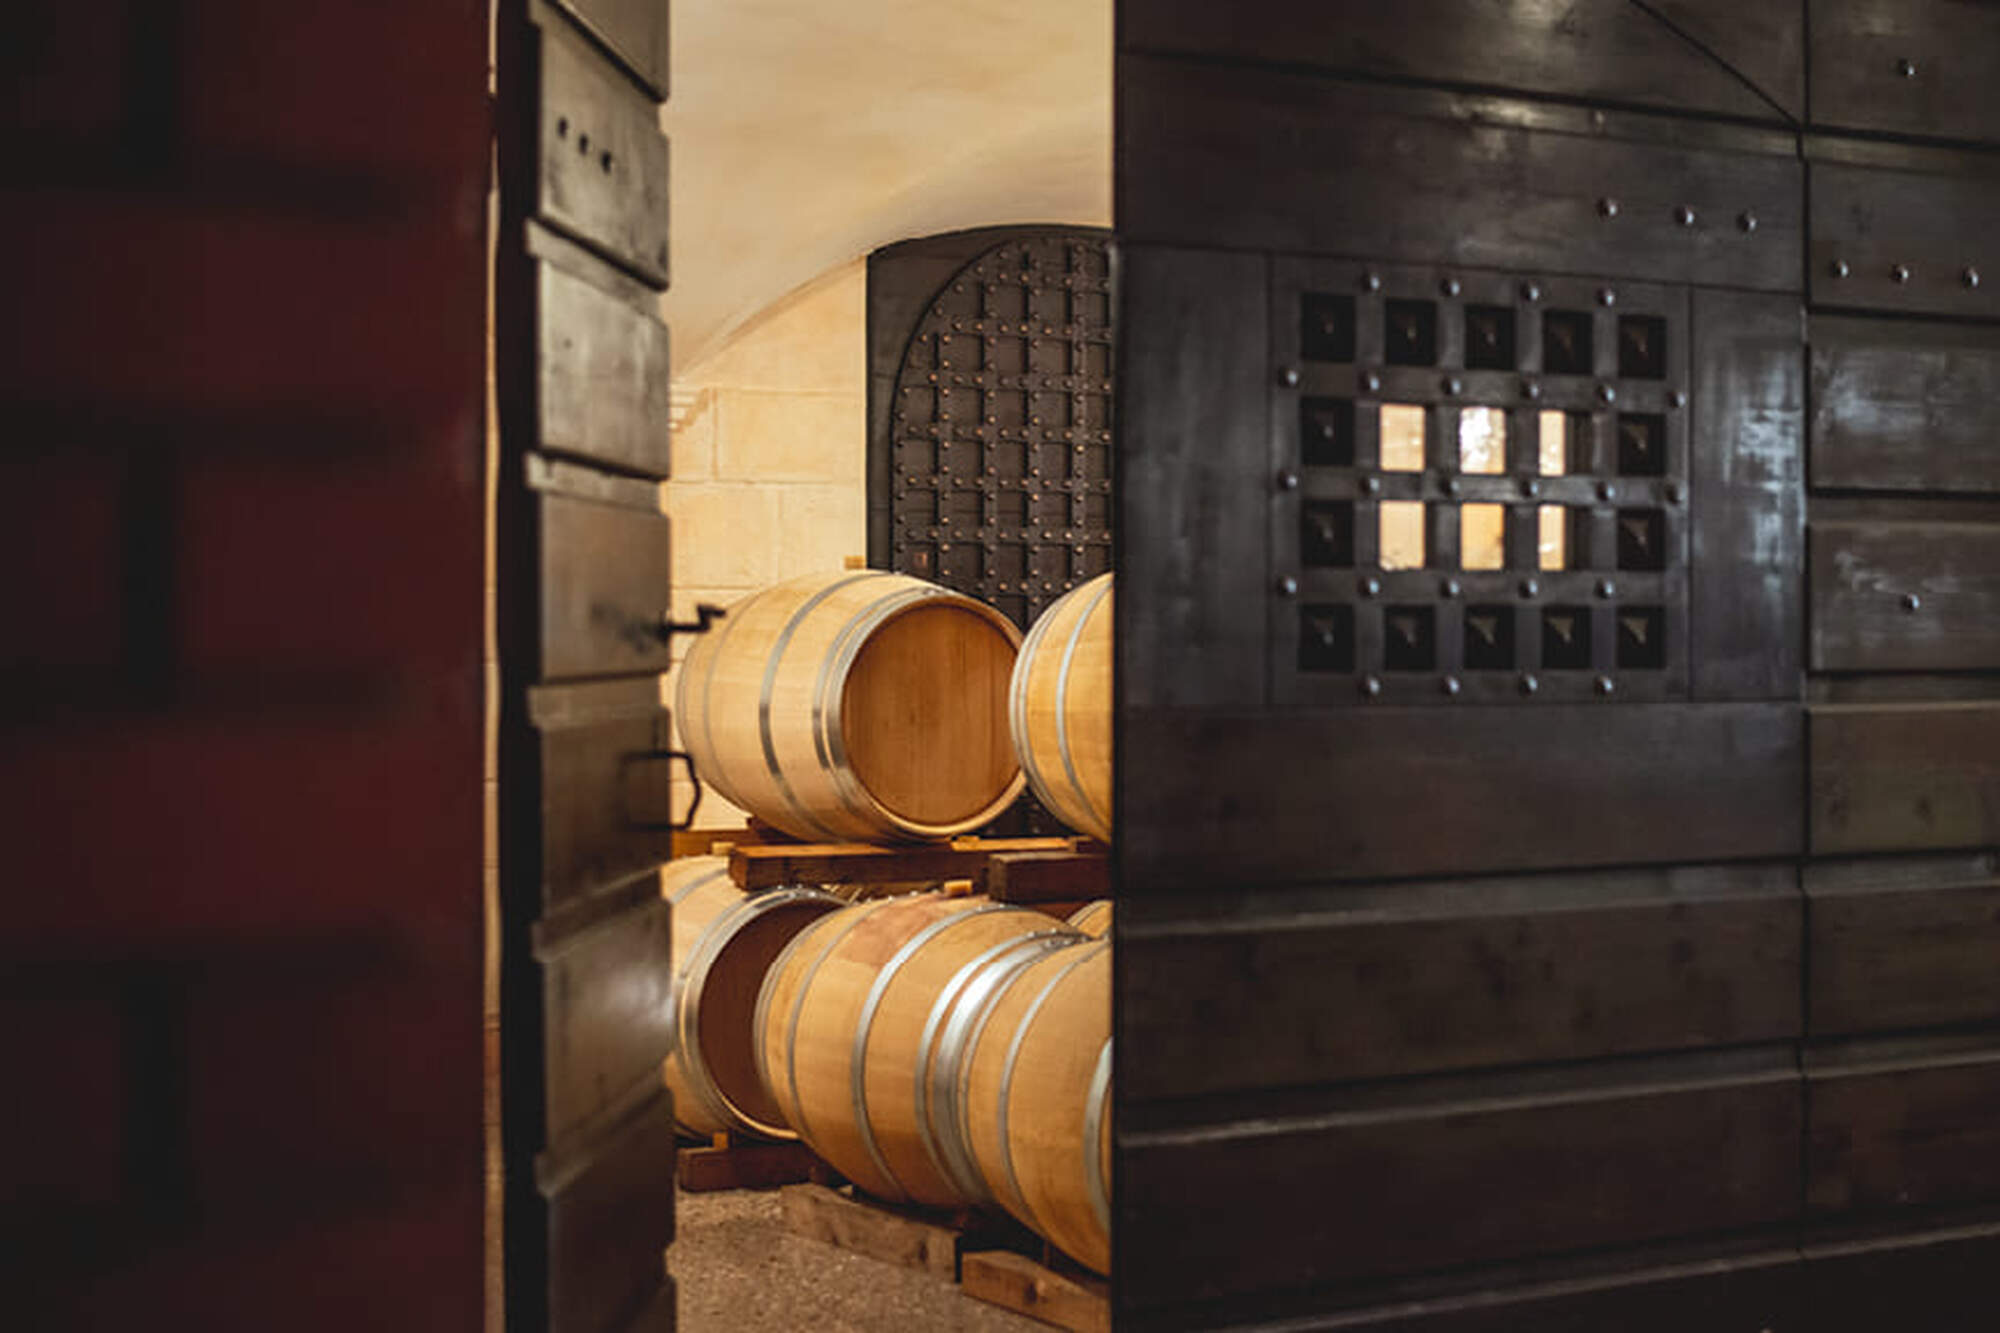 Door opening to Allegrini wine cellar where wine barrels are visible.